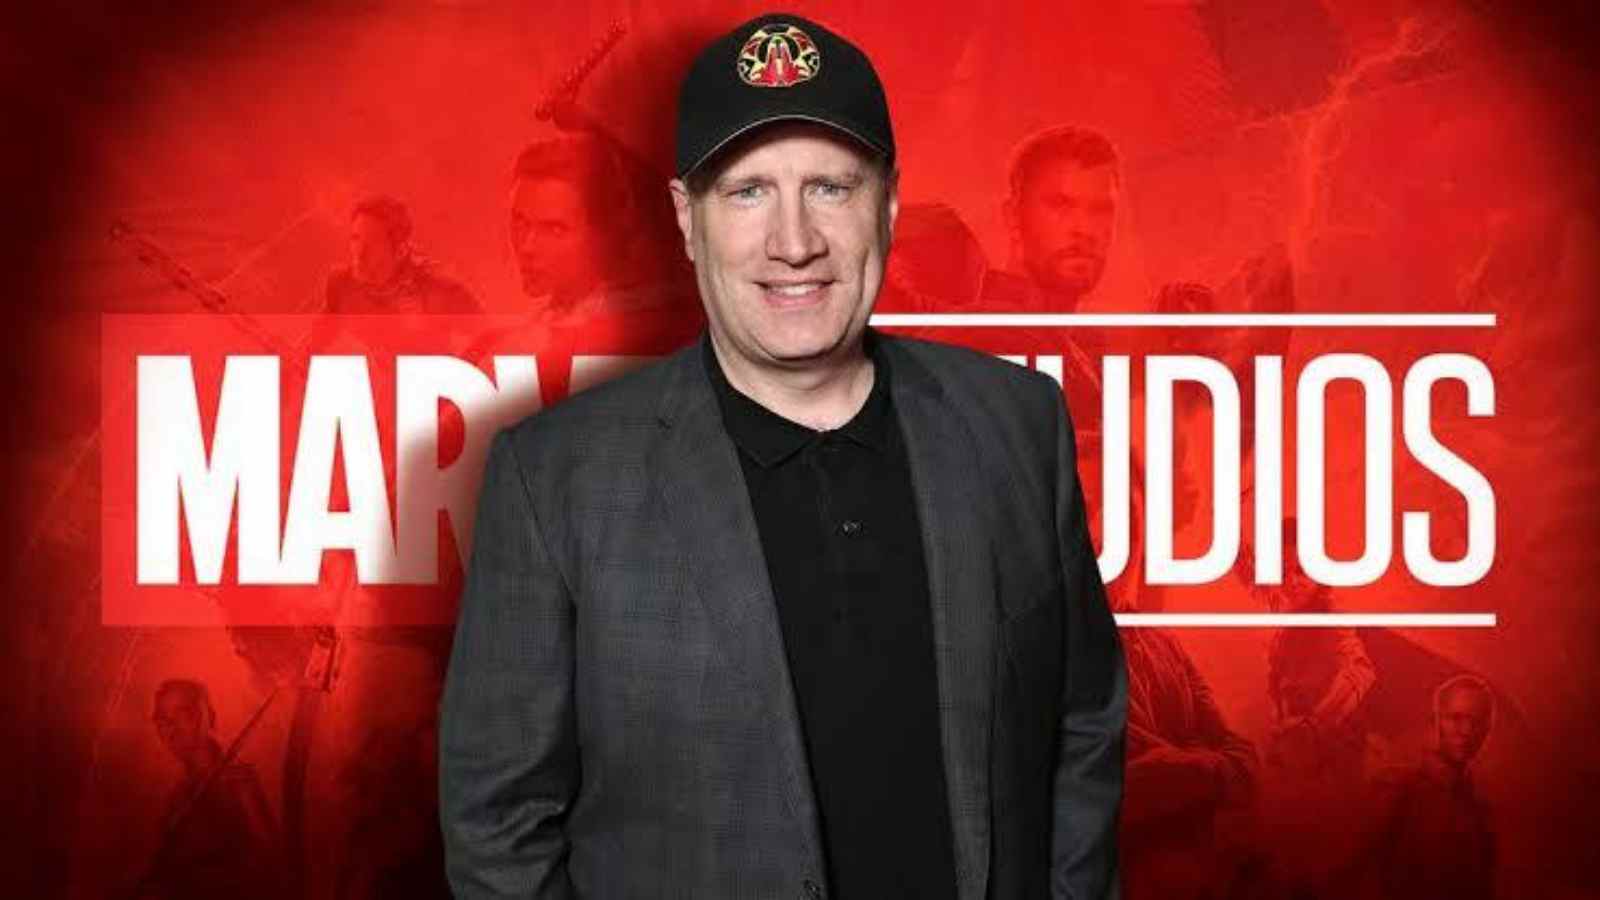 How much does the Marvel President, Kevin Feige earns?